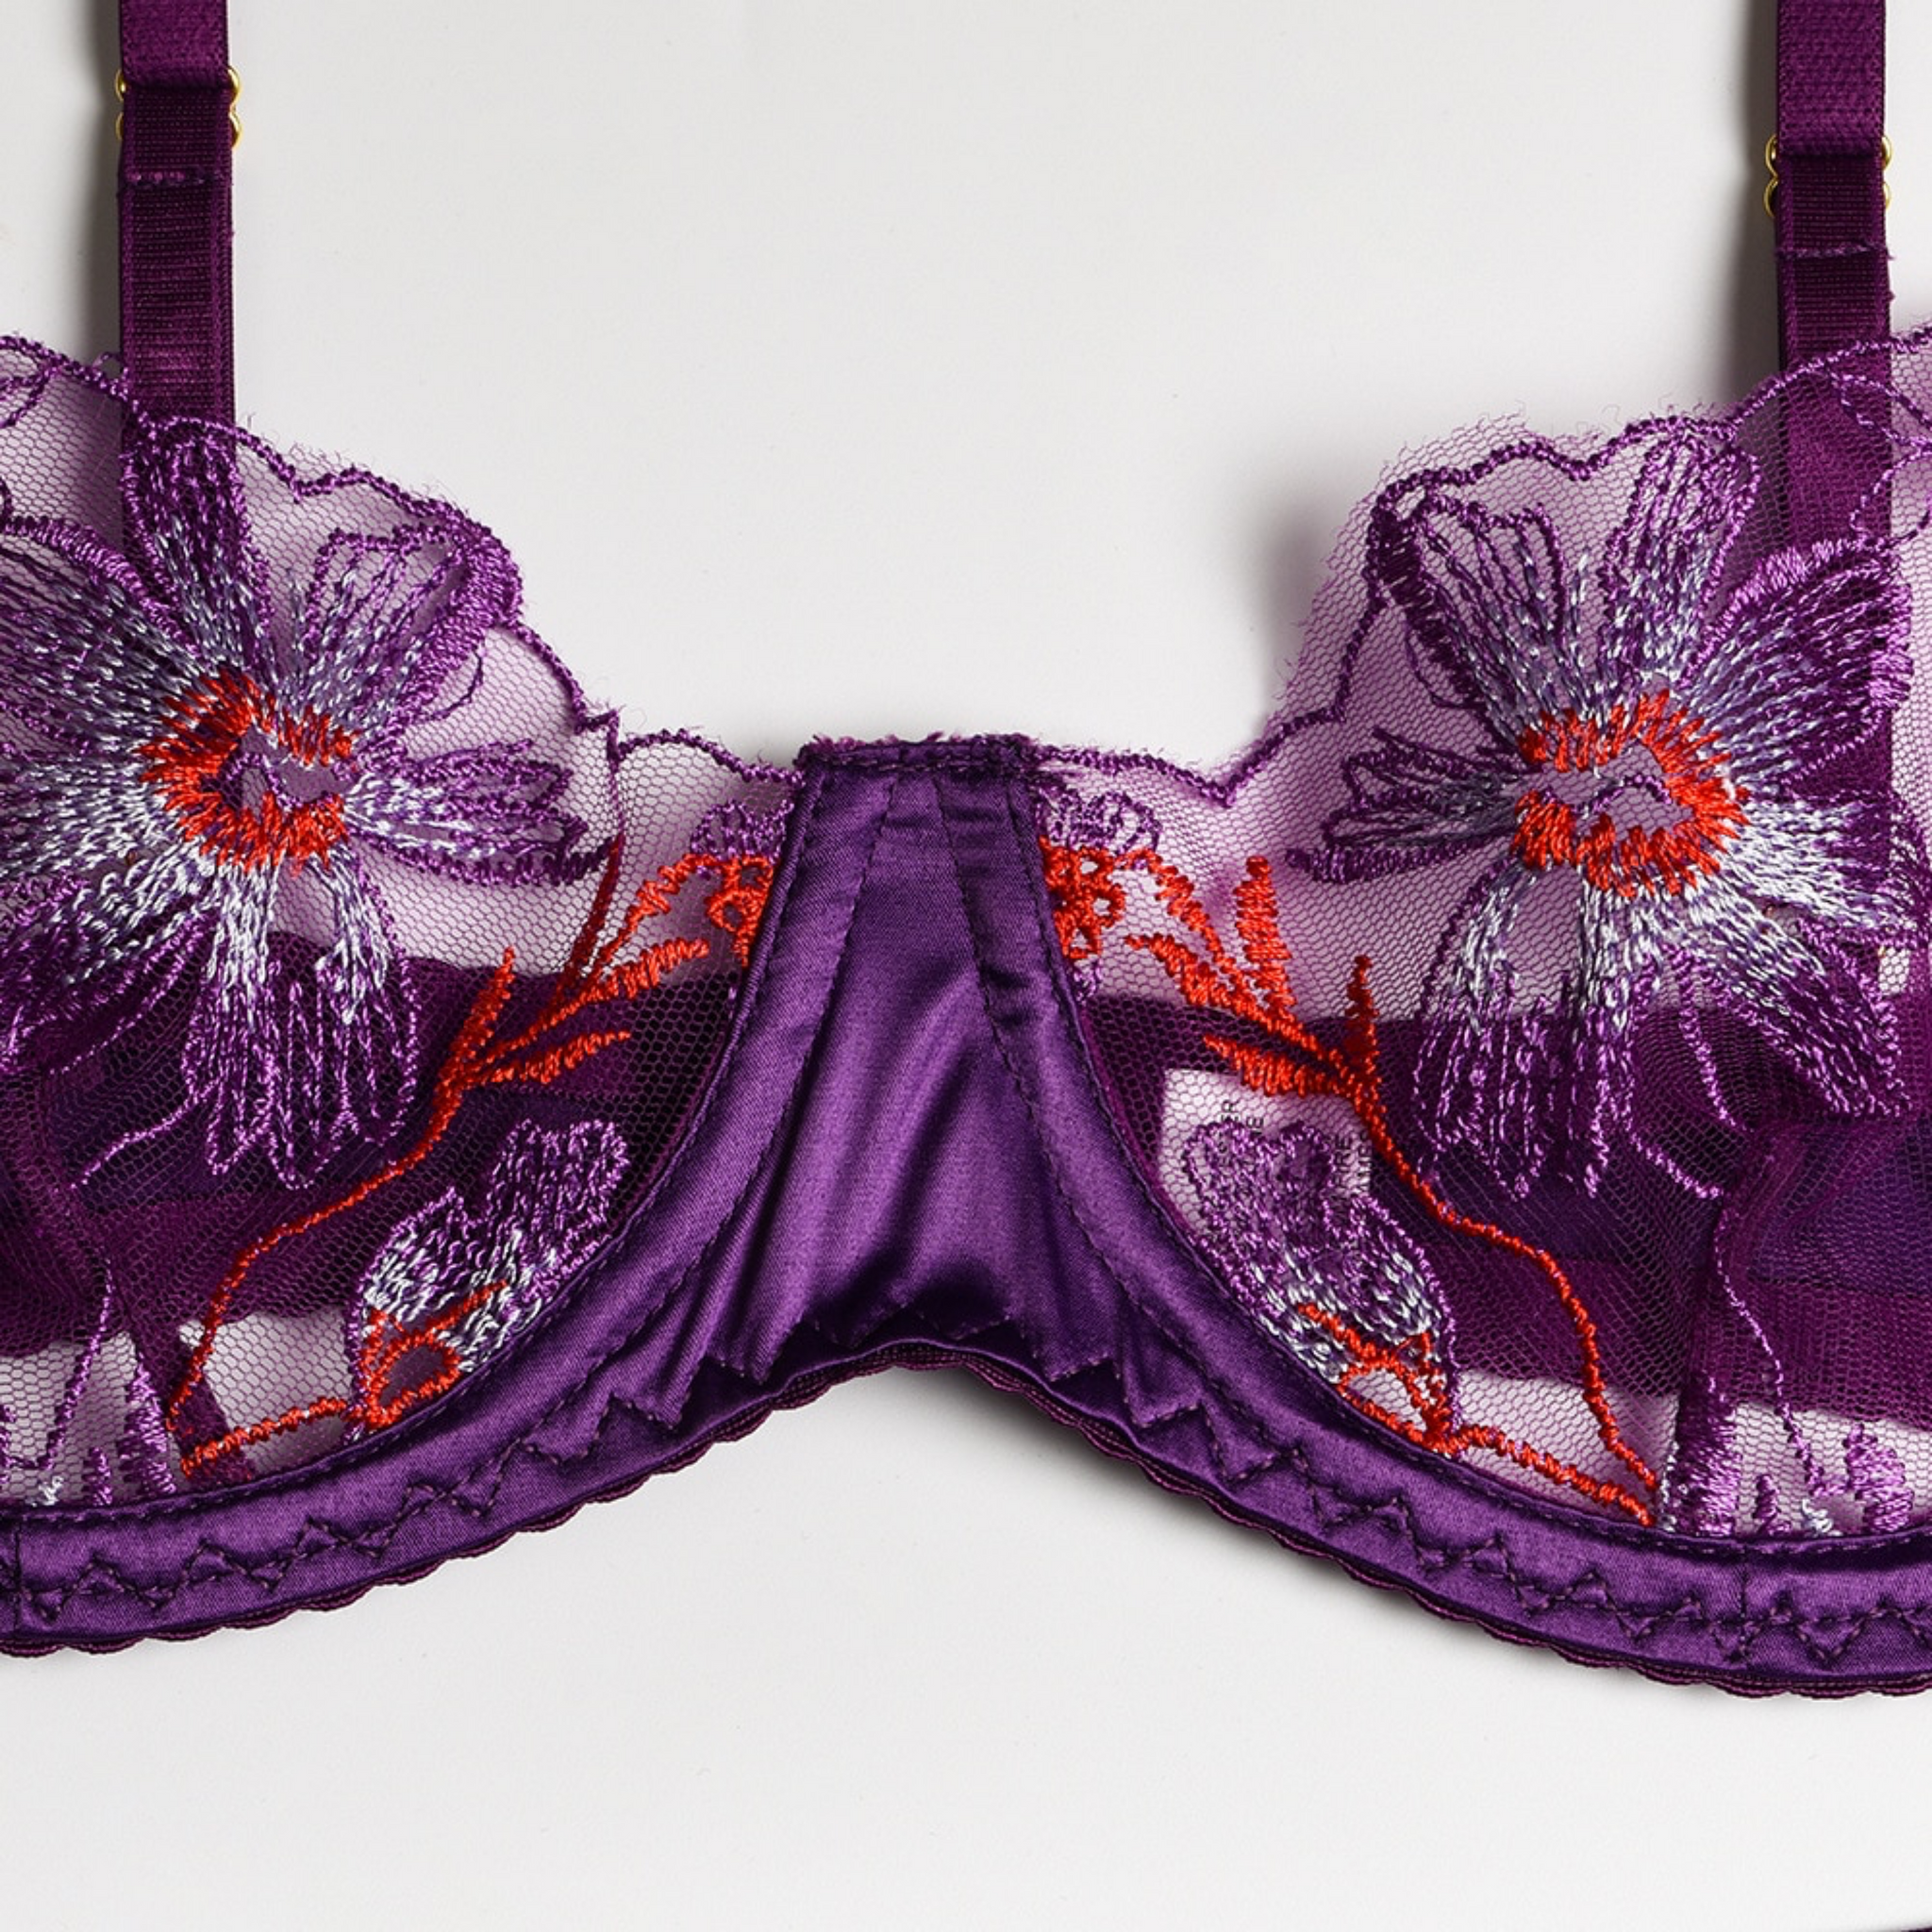 Sexy Lingerie Thin Lace Embroidered Stitching Silky Purple Underwear  Underwire Bra Three-piece Garter Thong Set - Anissa Atelier Affordable,  Unique and Quality Lingerie and More. For more Femininity!